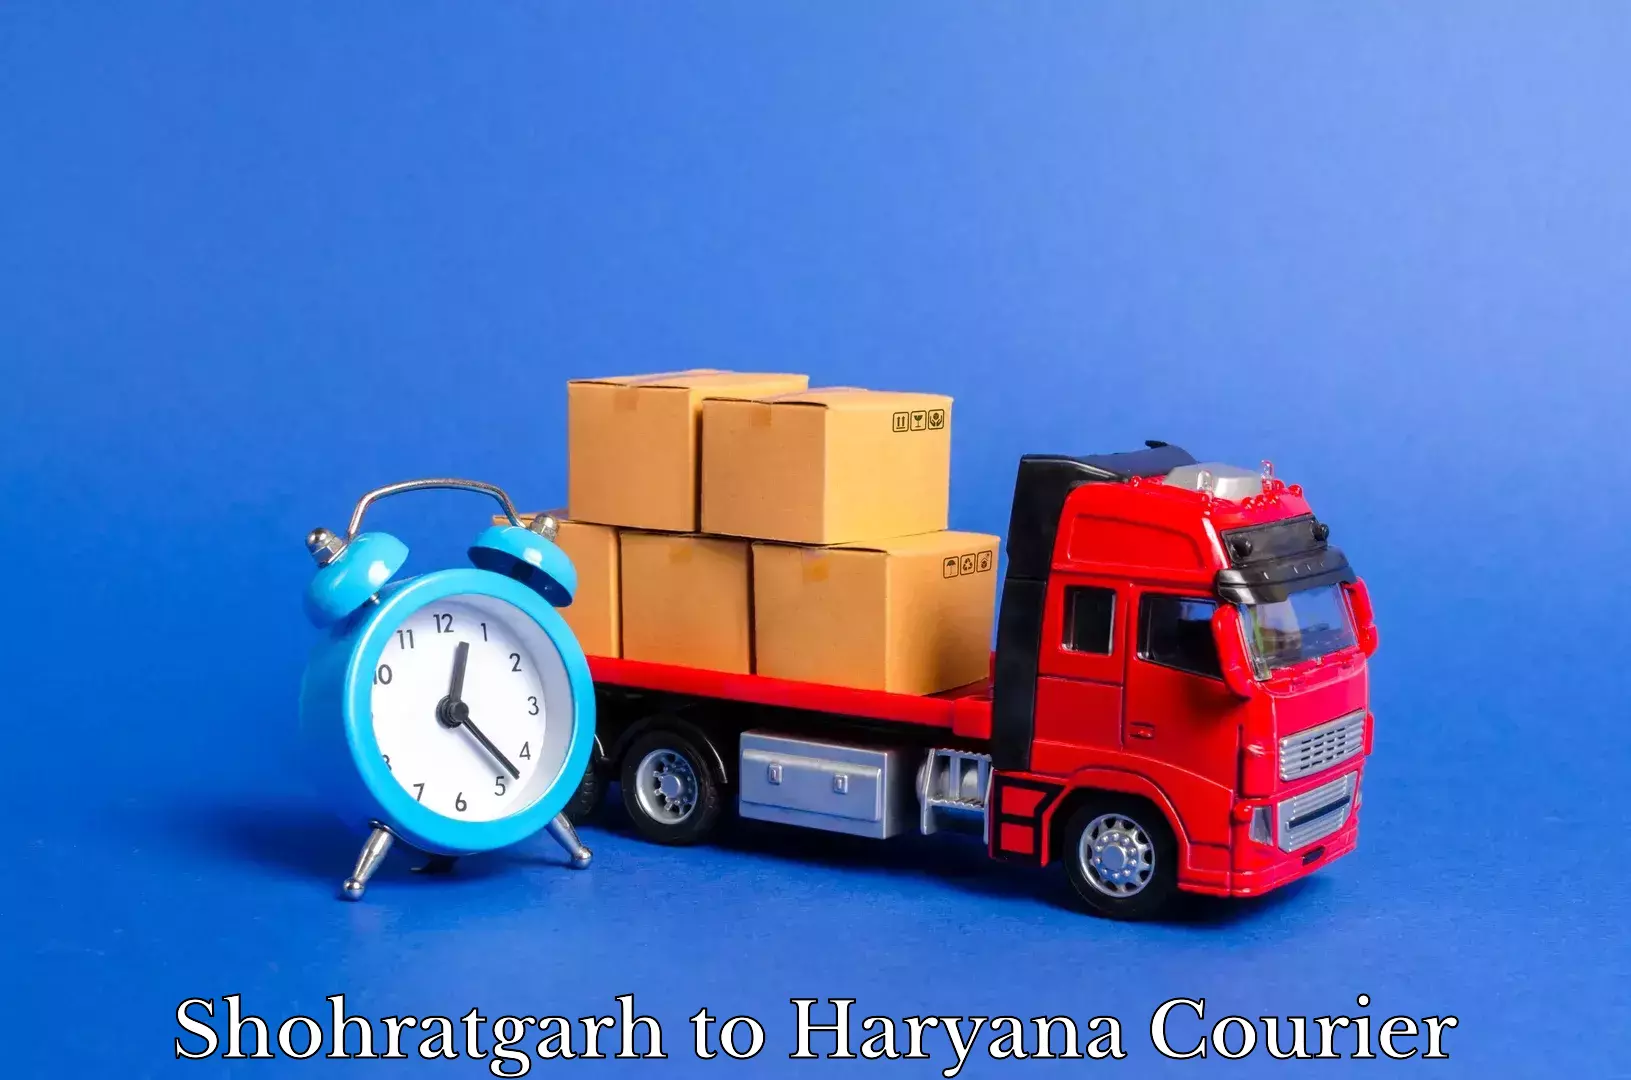 Budget-friendly moving services in Shohratgarh to Panipat